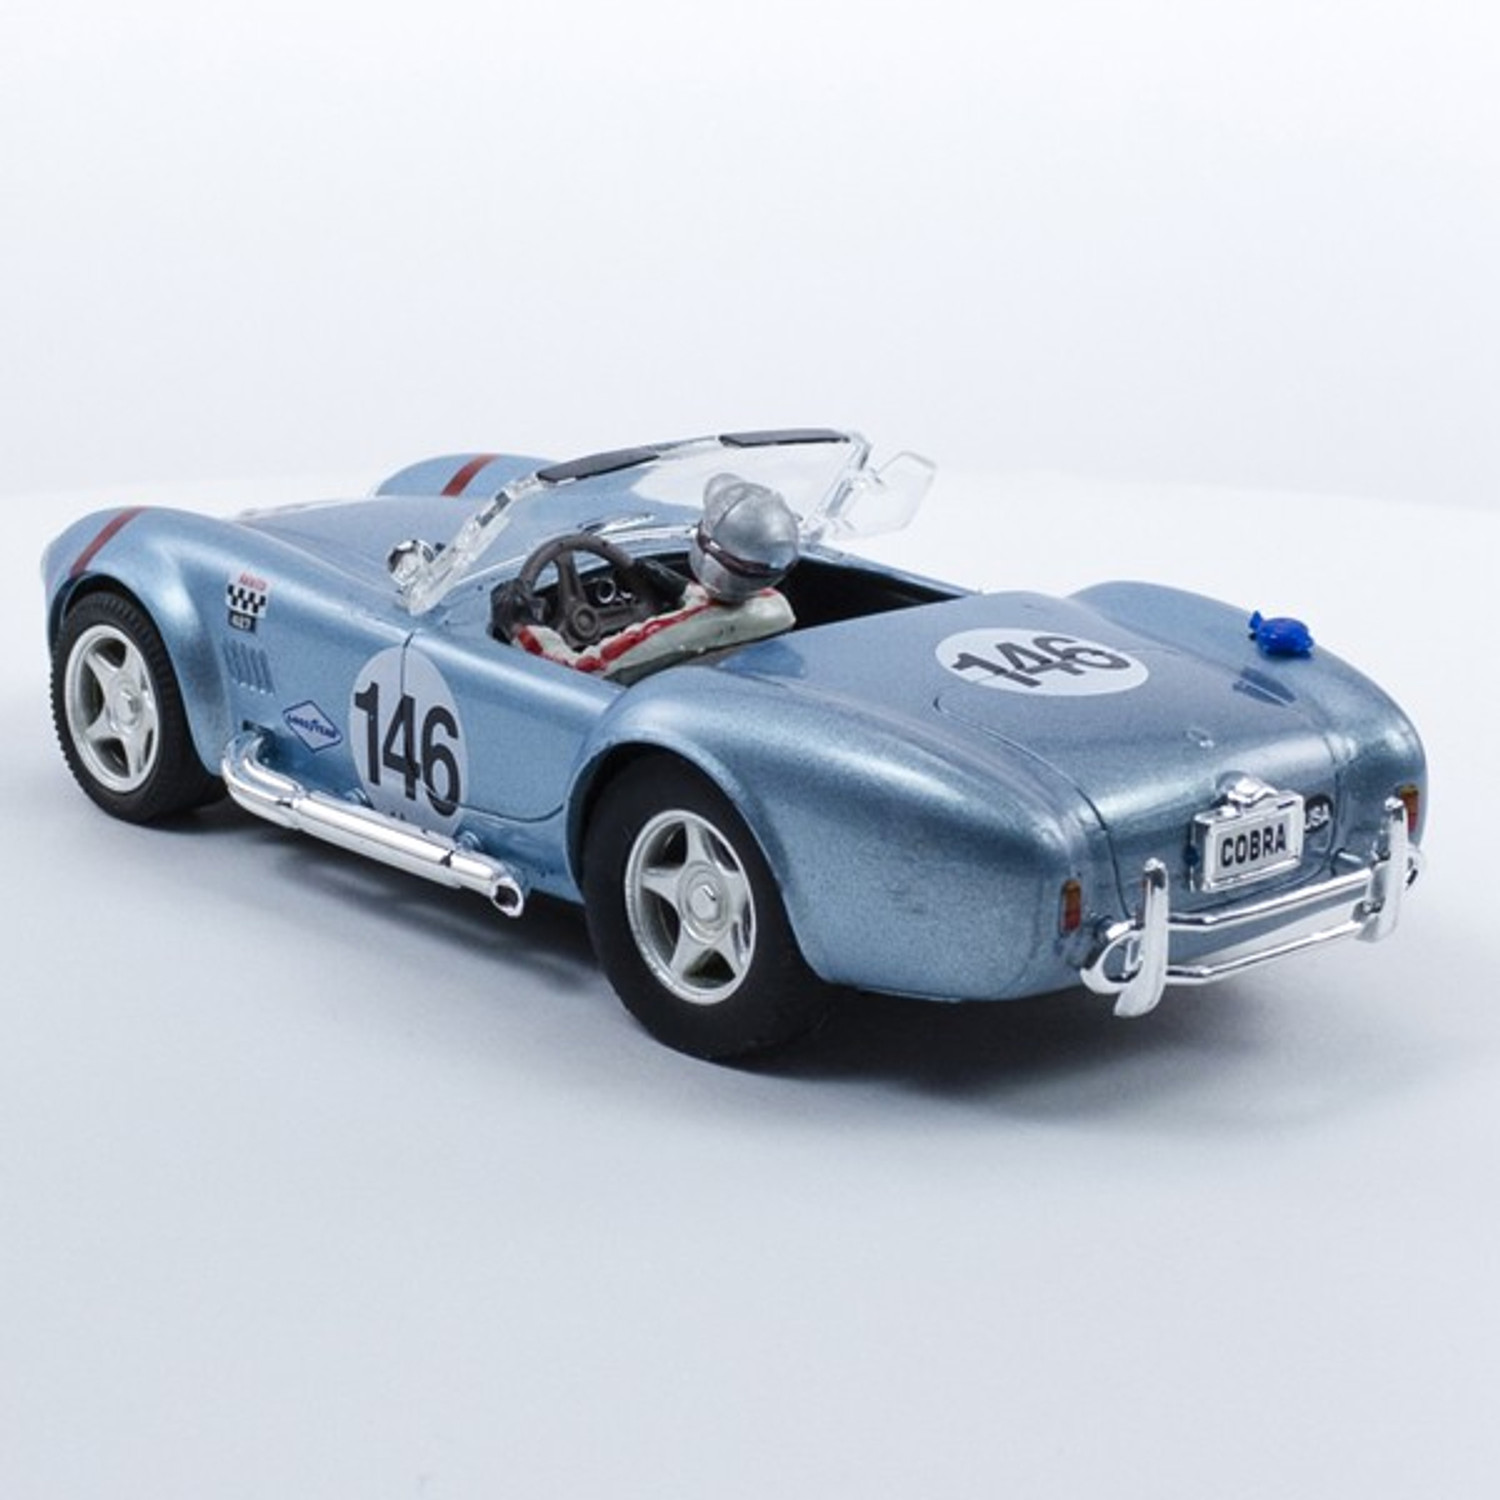 Stock Number: 16232 - Light Blue Number  146 Car by Unknown